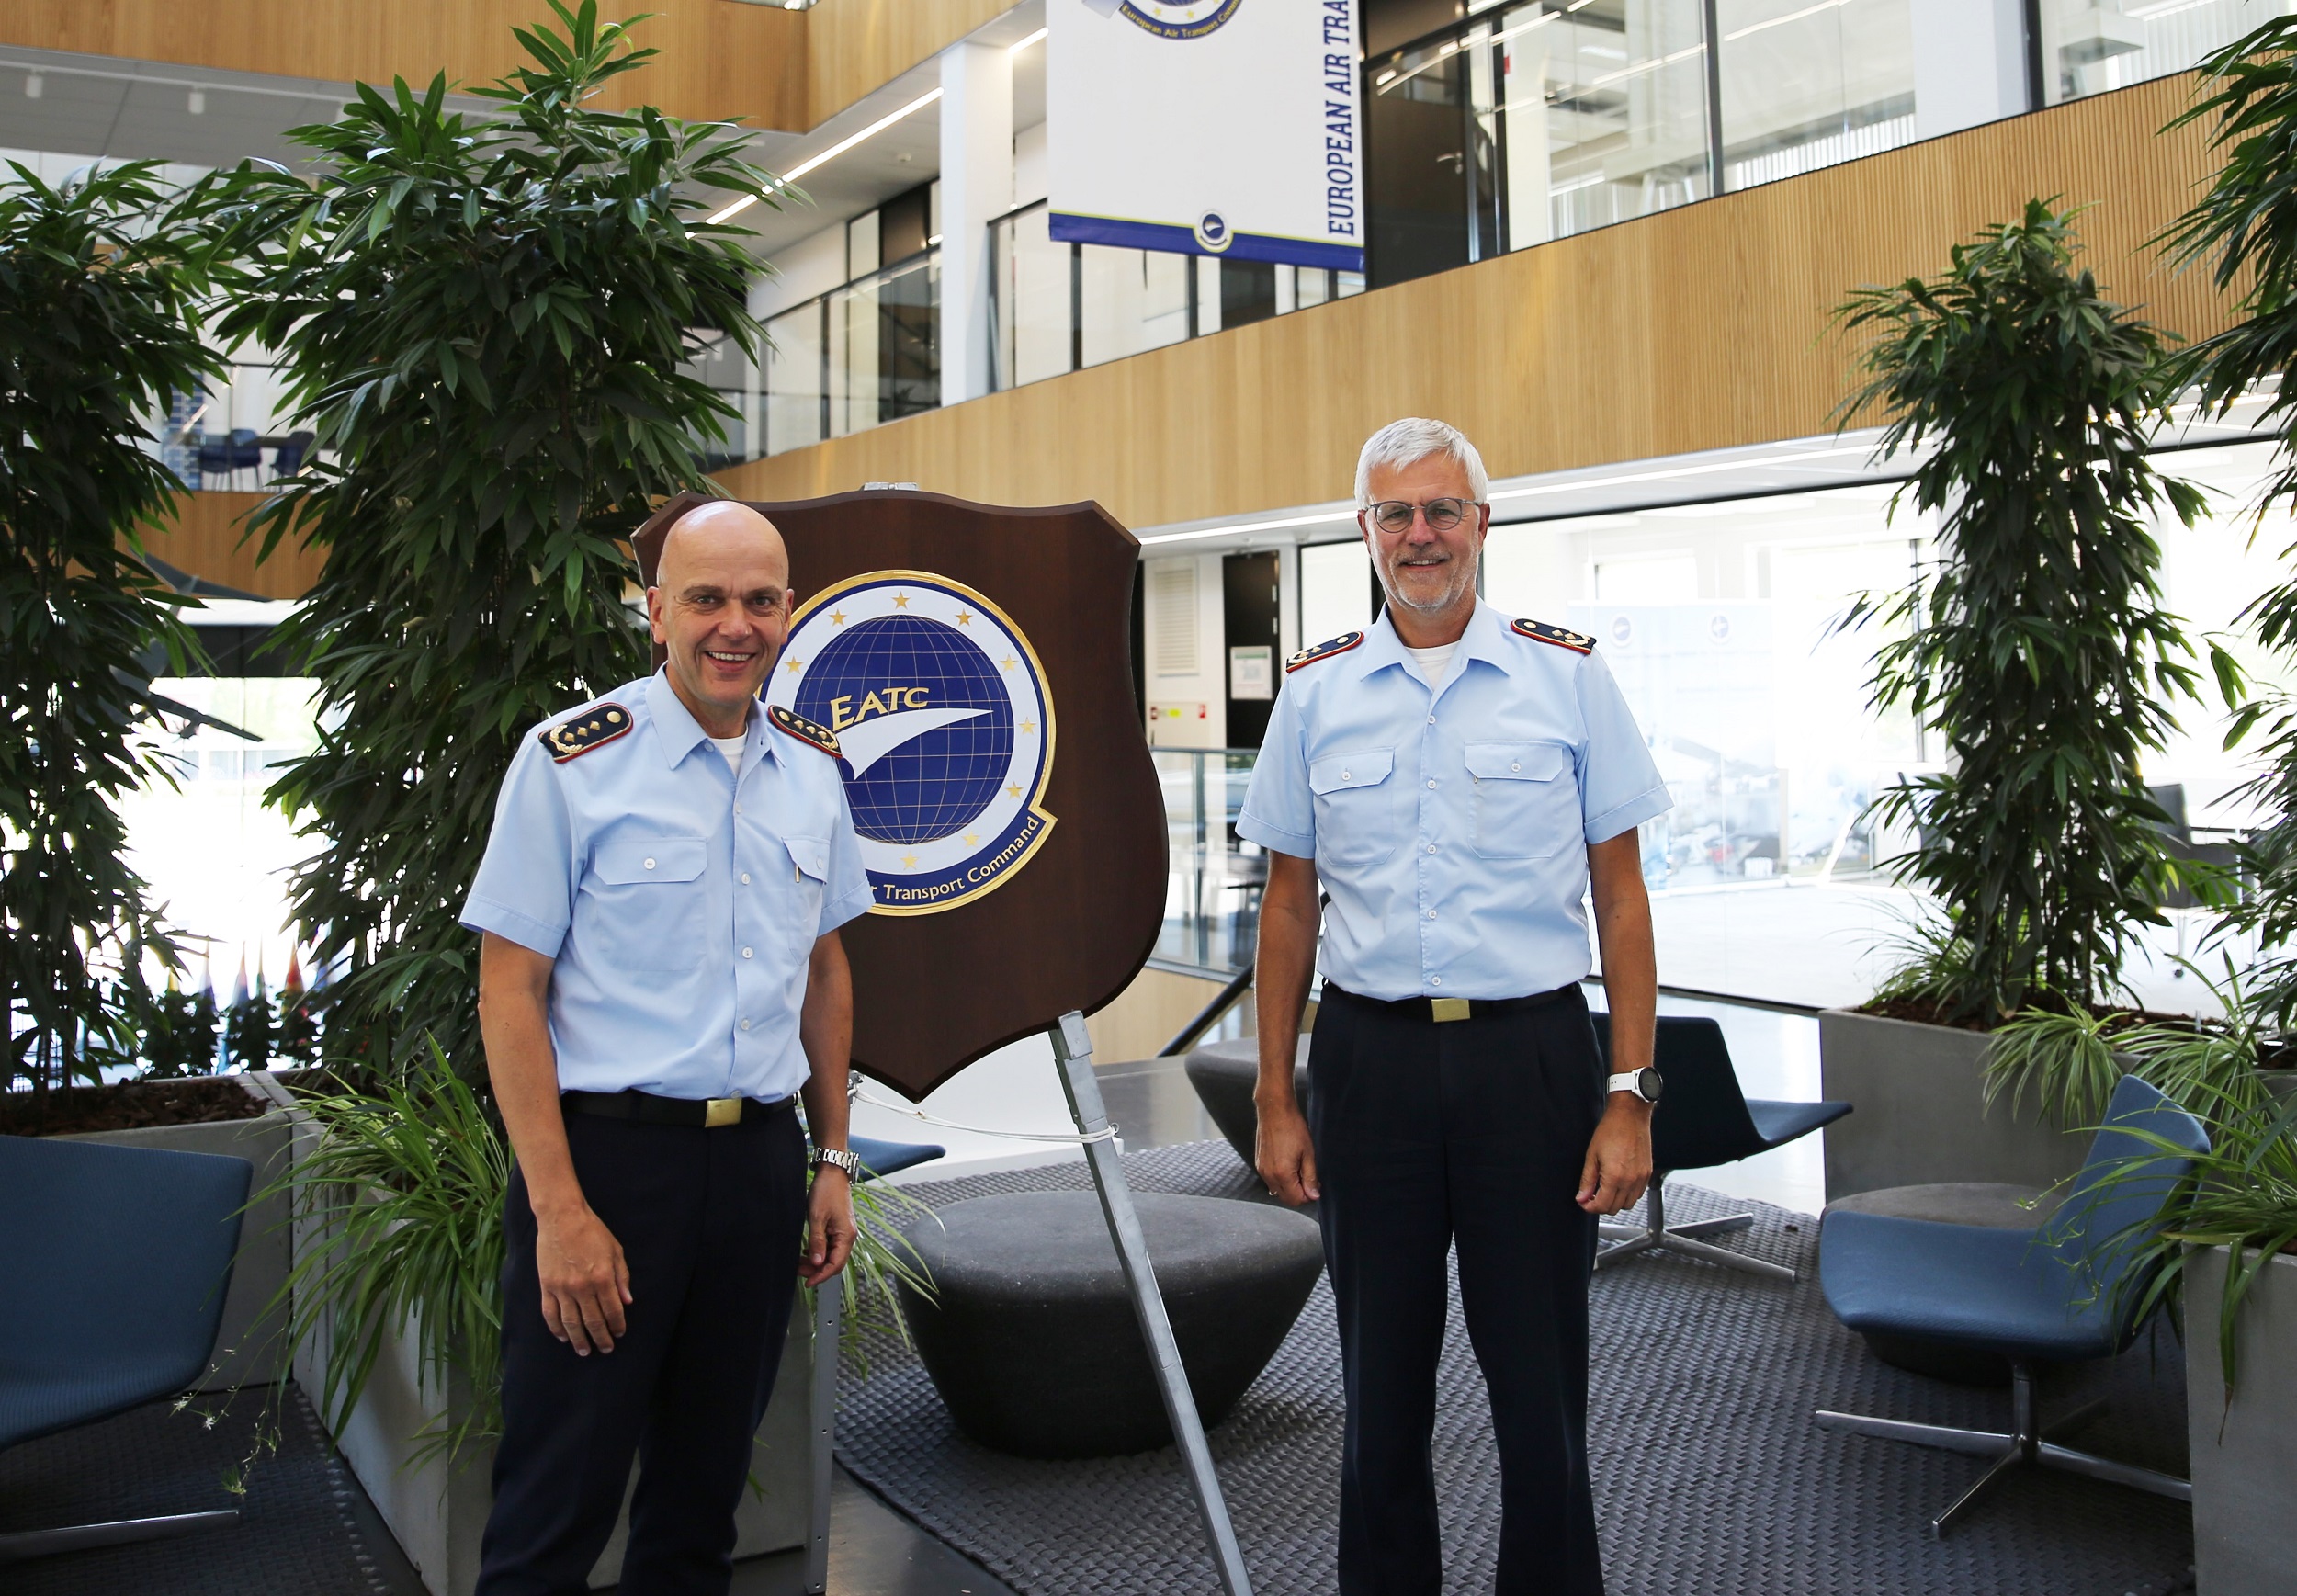 Commanding General of the German Air Force “Forces Command” visits EATC